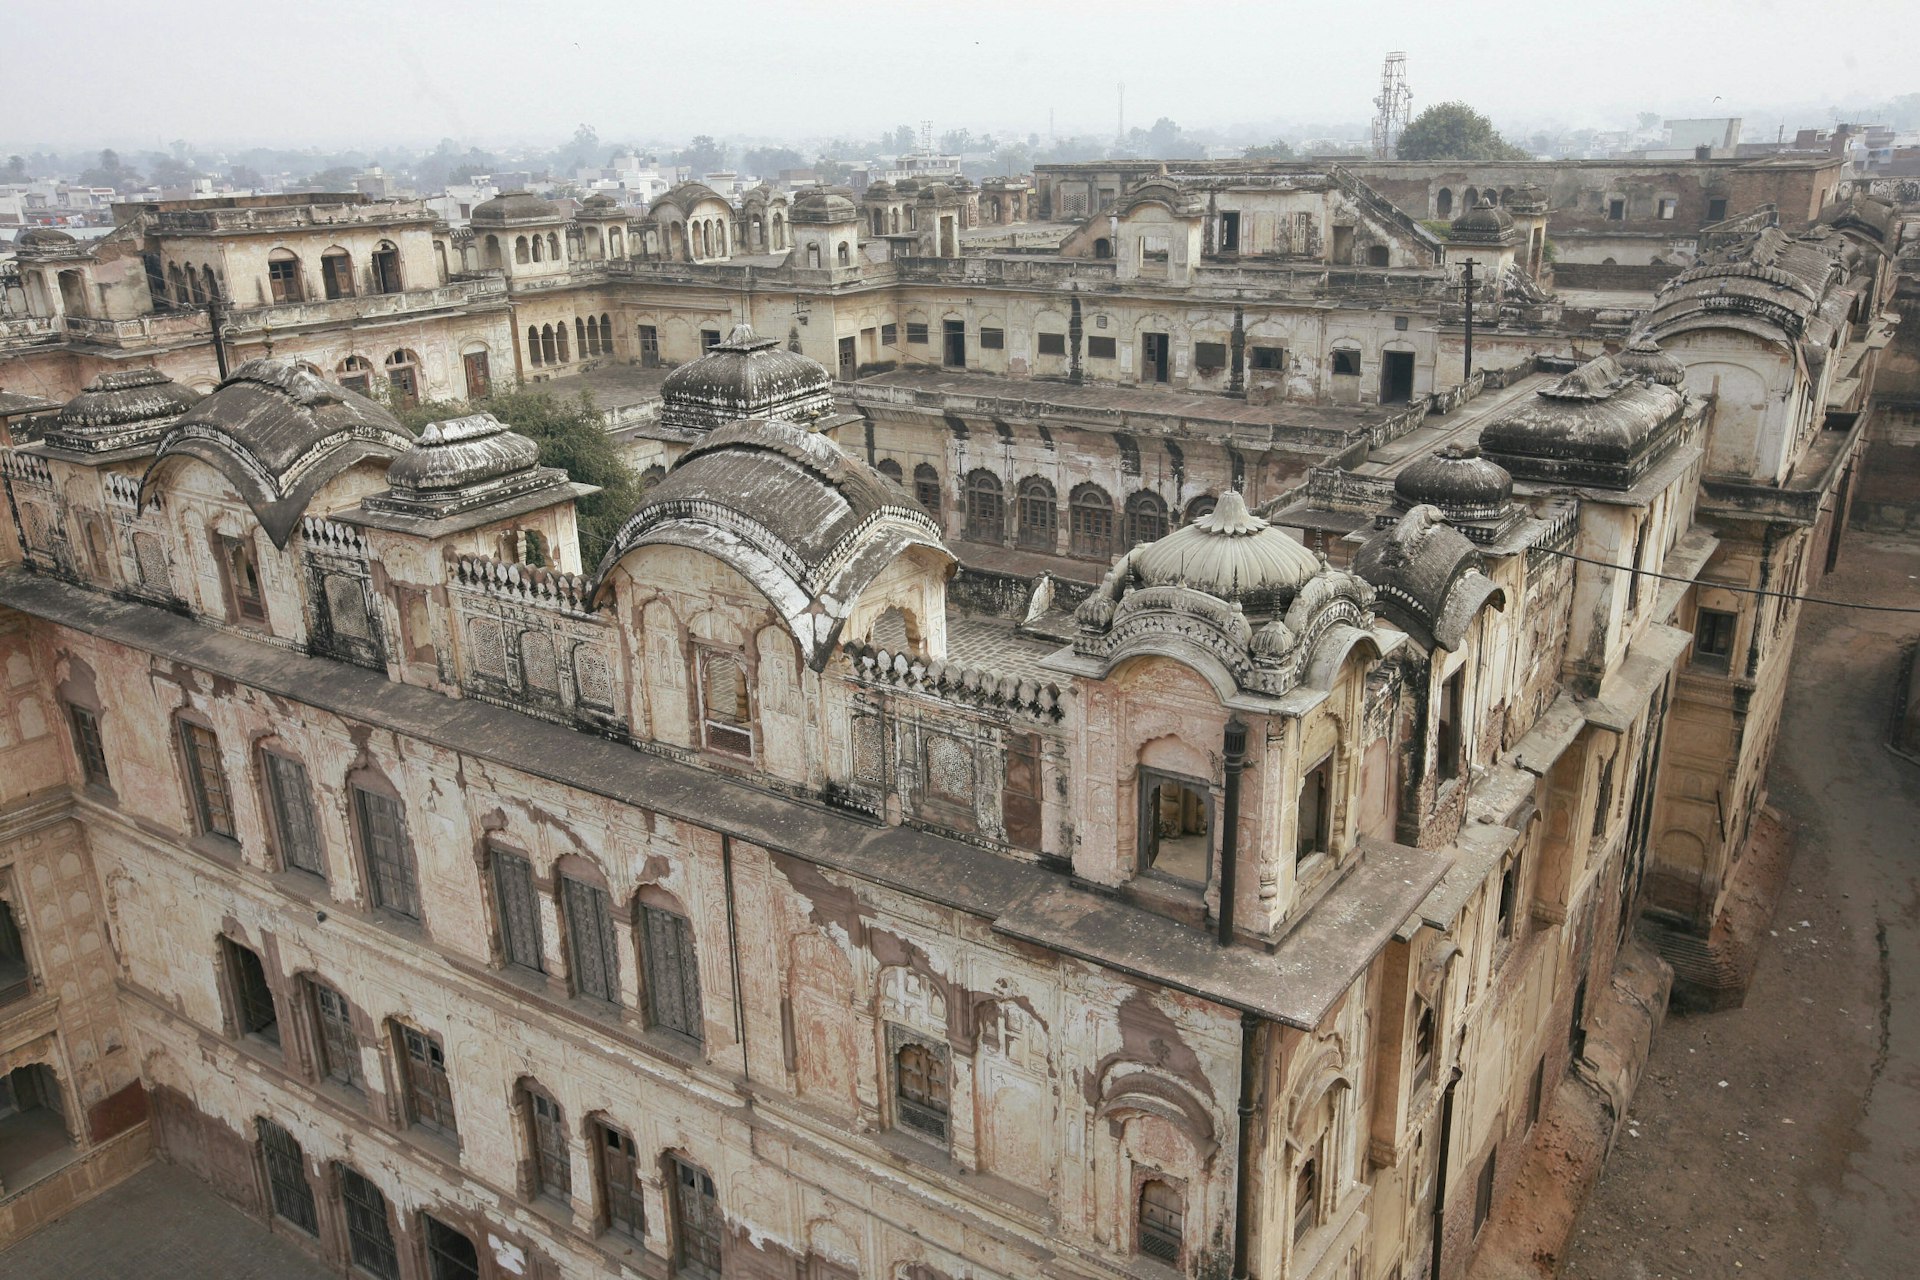 The fading glory of Patiala's fort © The India Today Group / Getty Images